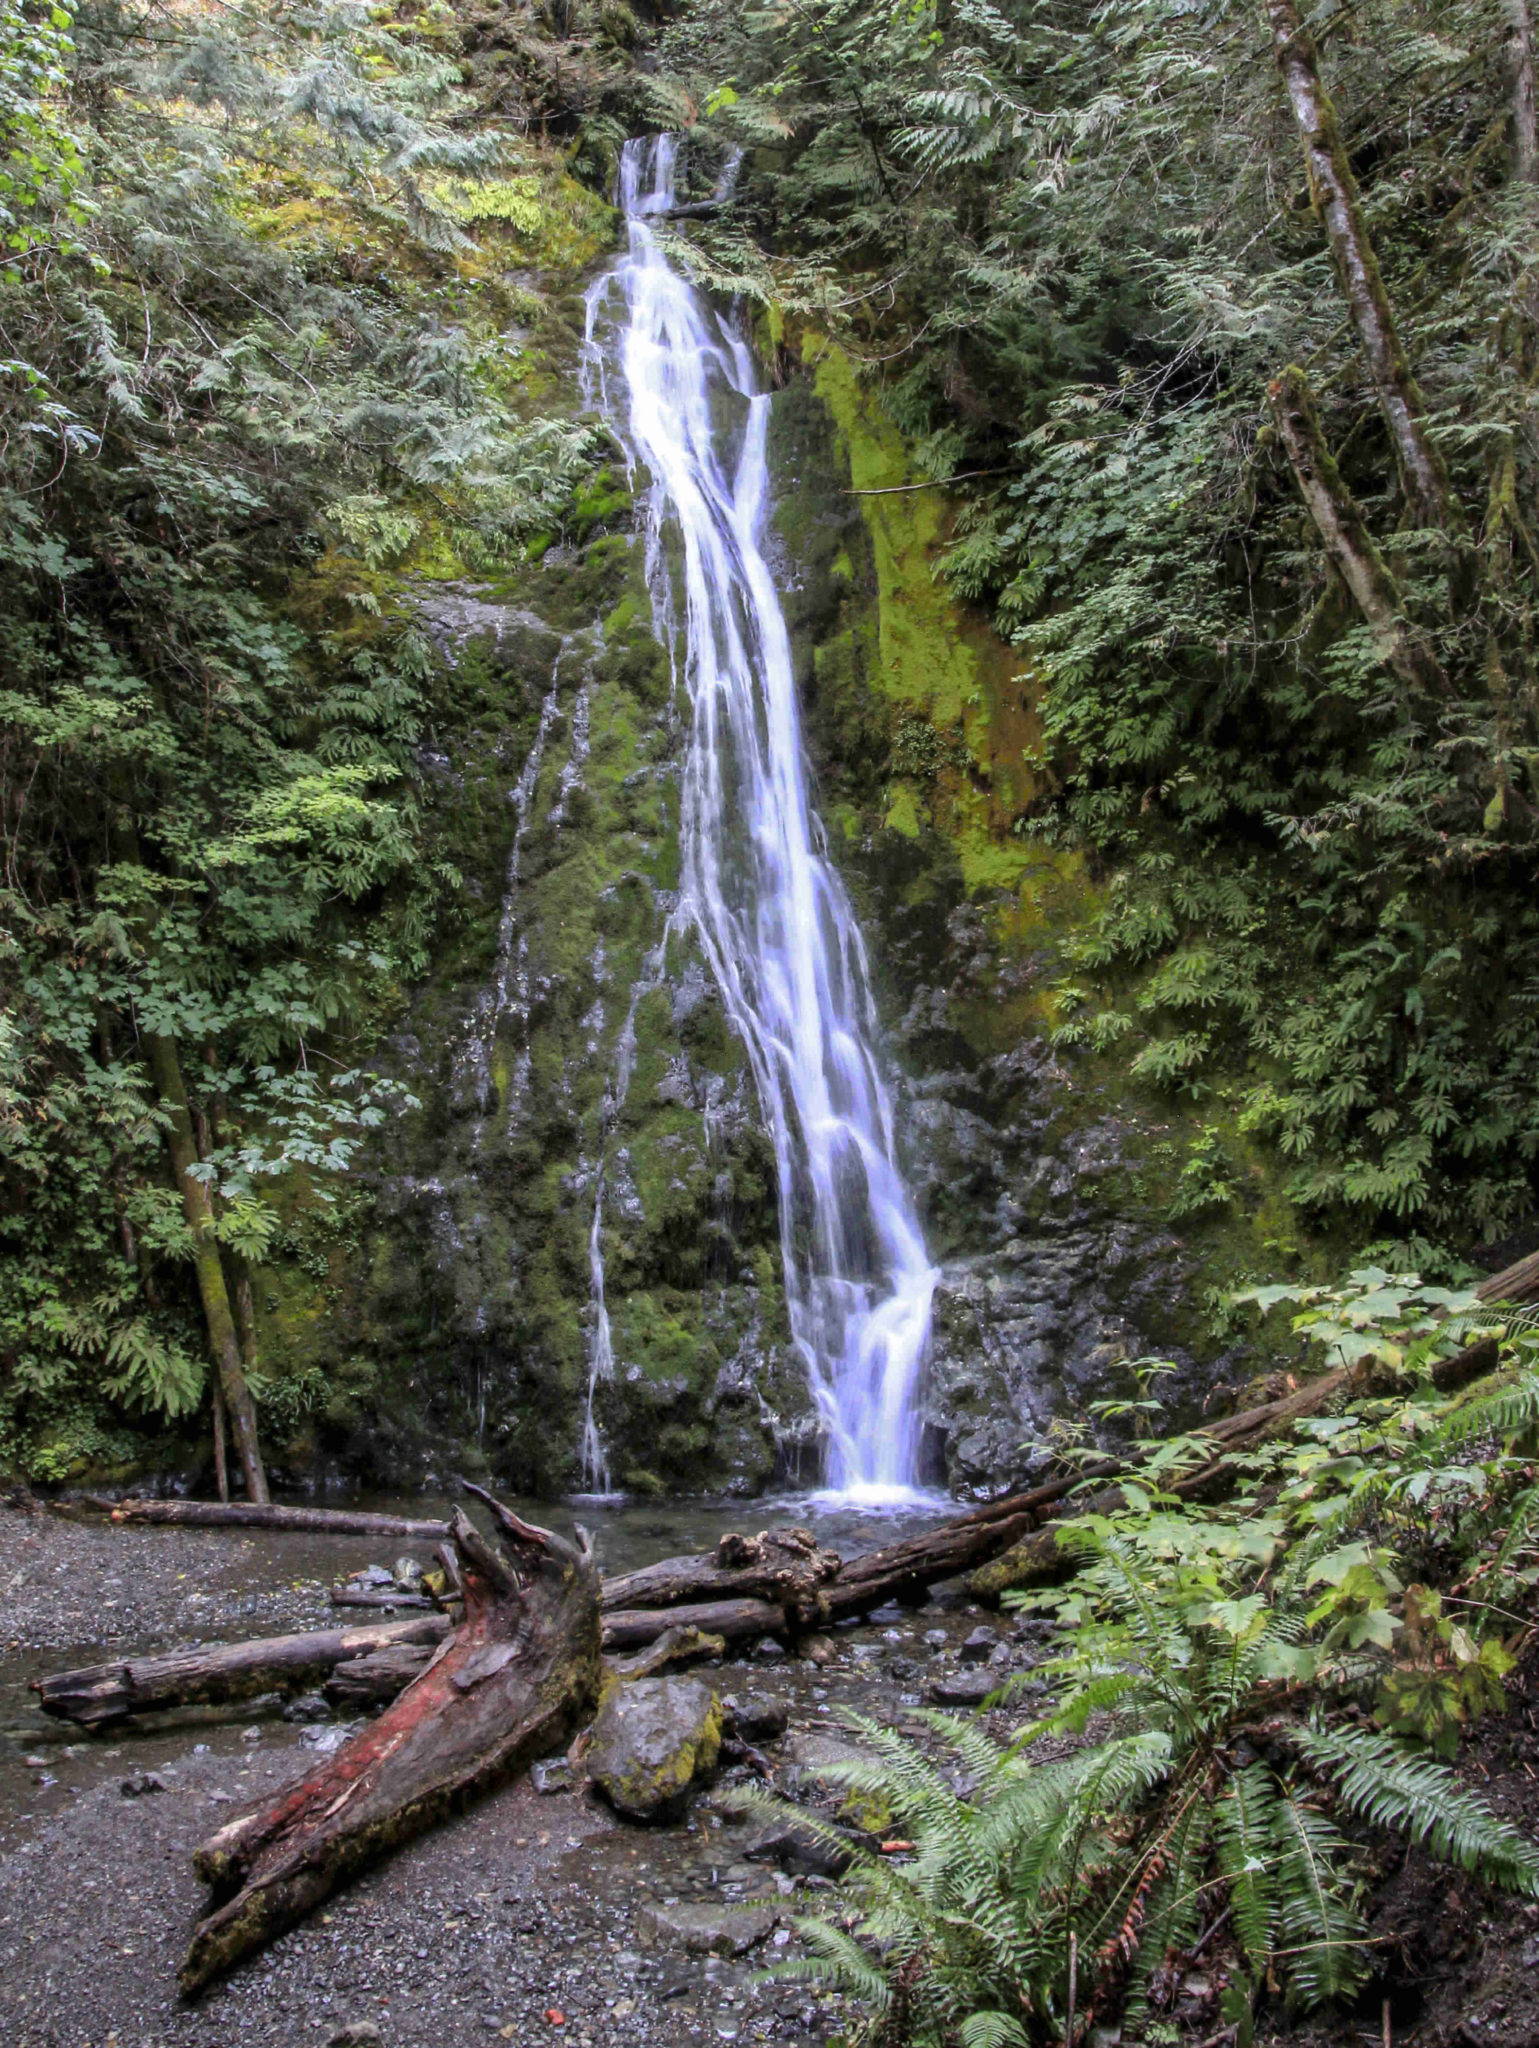 Madison Falls in Olympic National Park